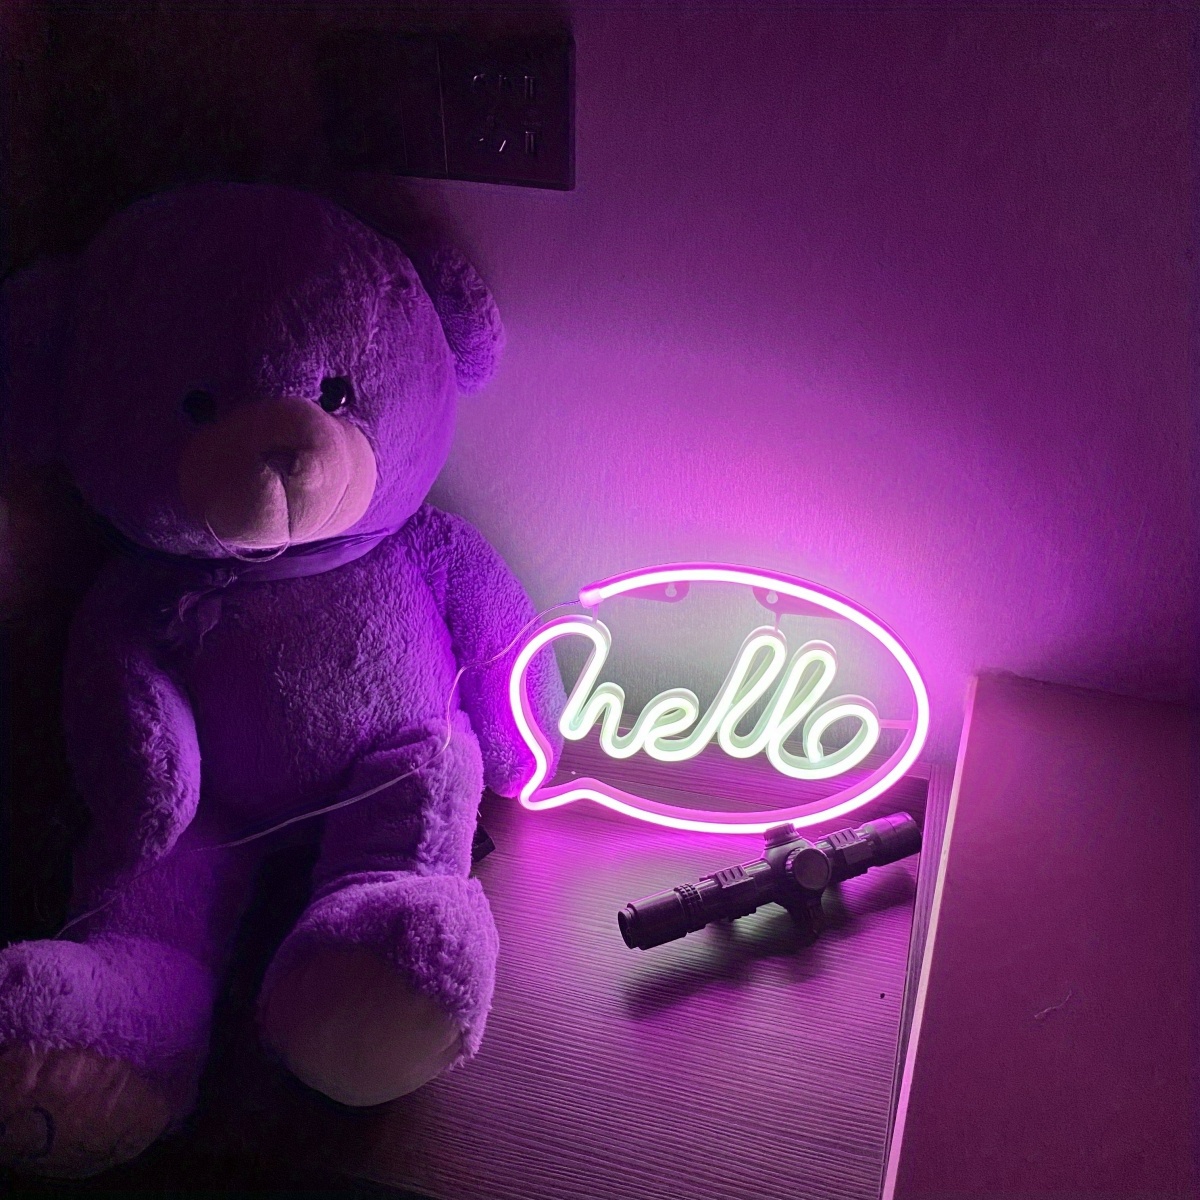 1pc Picture Frame Hello Neon Sign, LED Modeling Neon Battery/USB Power  Supply, Hello Size 11.8x8.4in About (30x21.5cm) Outdoor Indoor LED  Decorative L